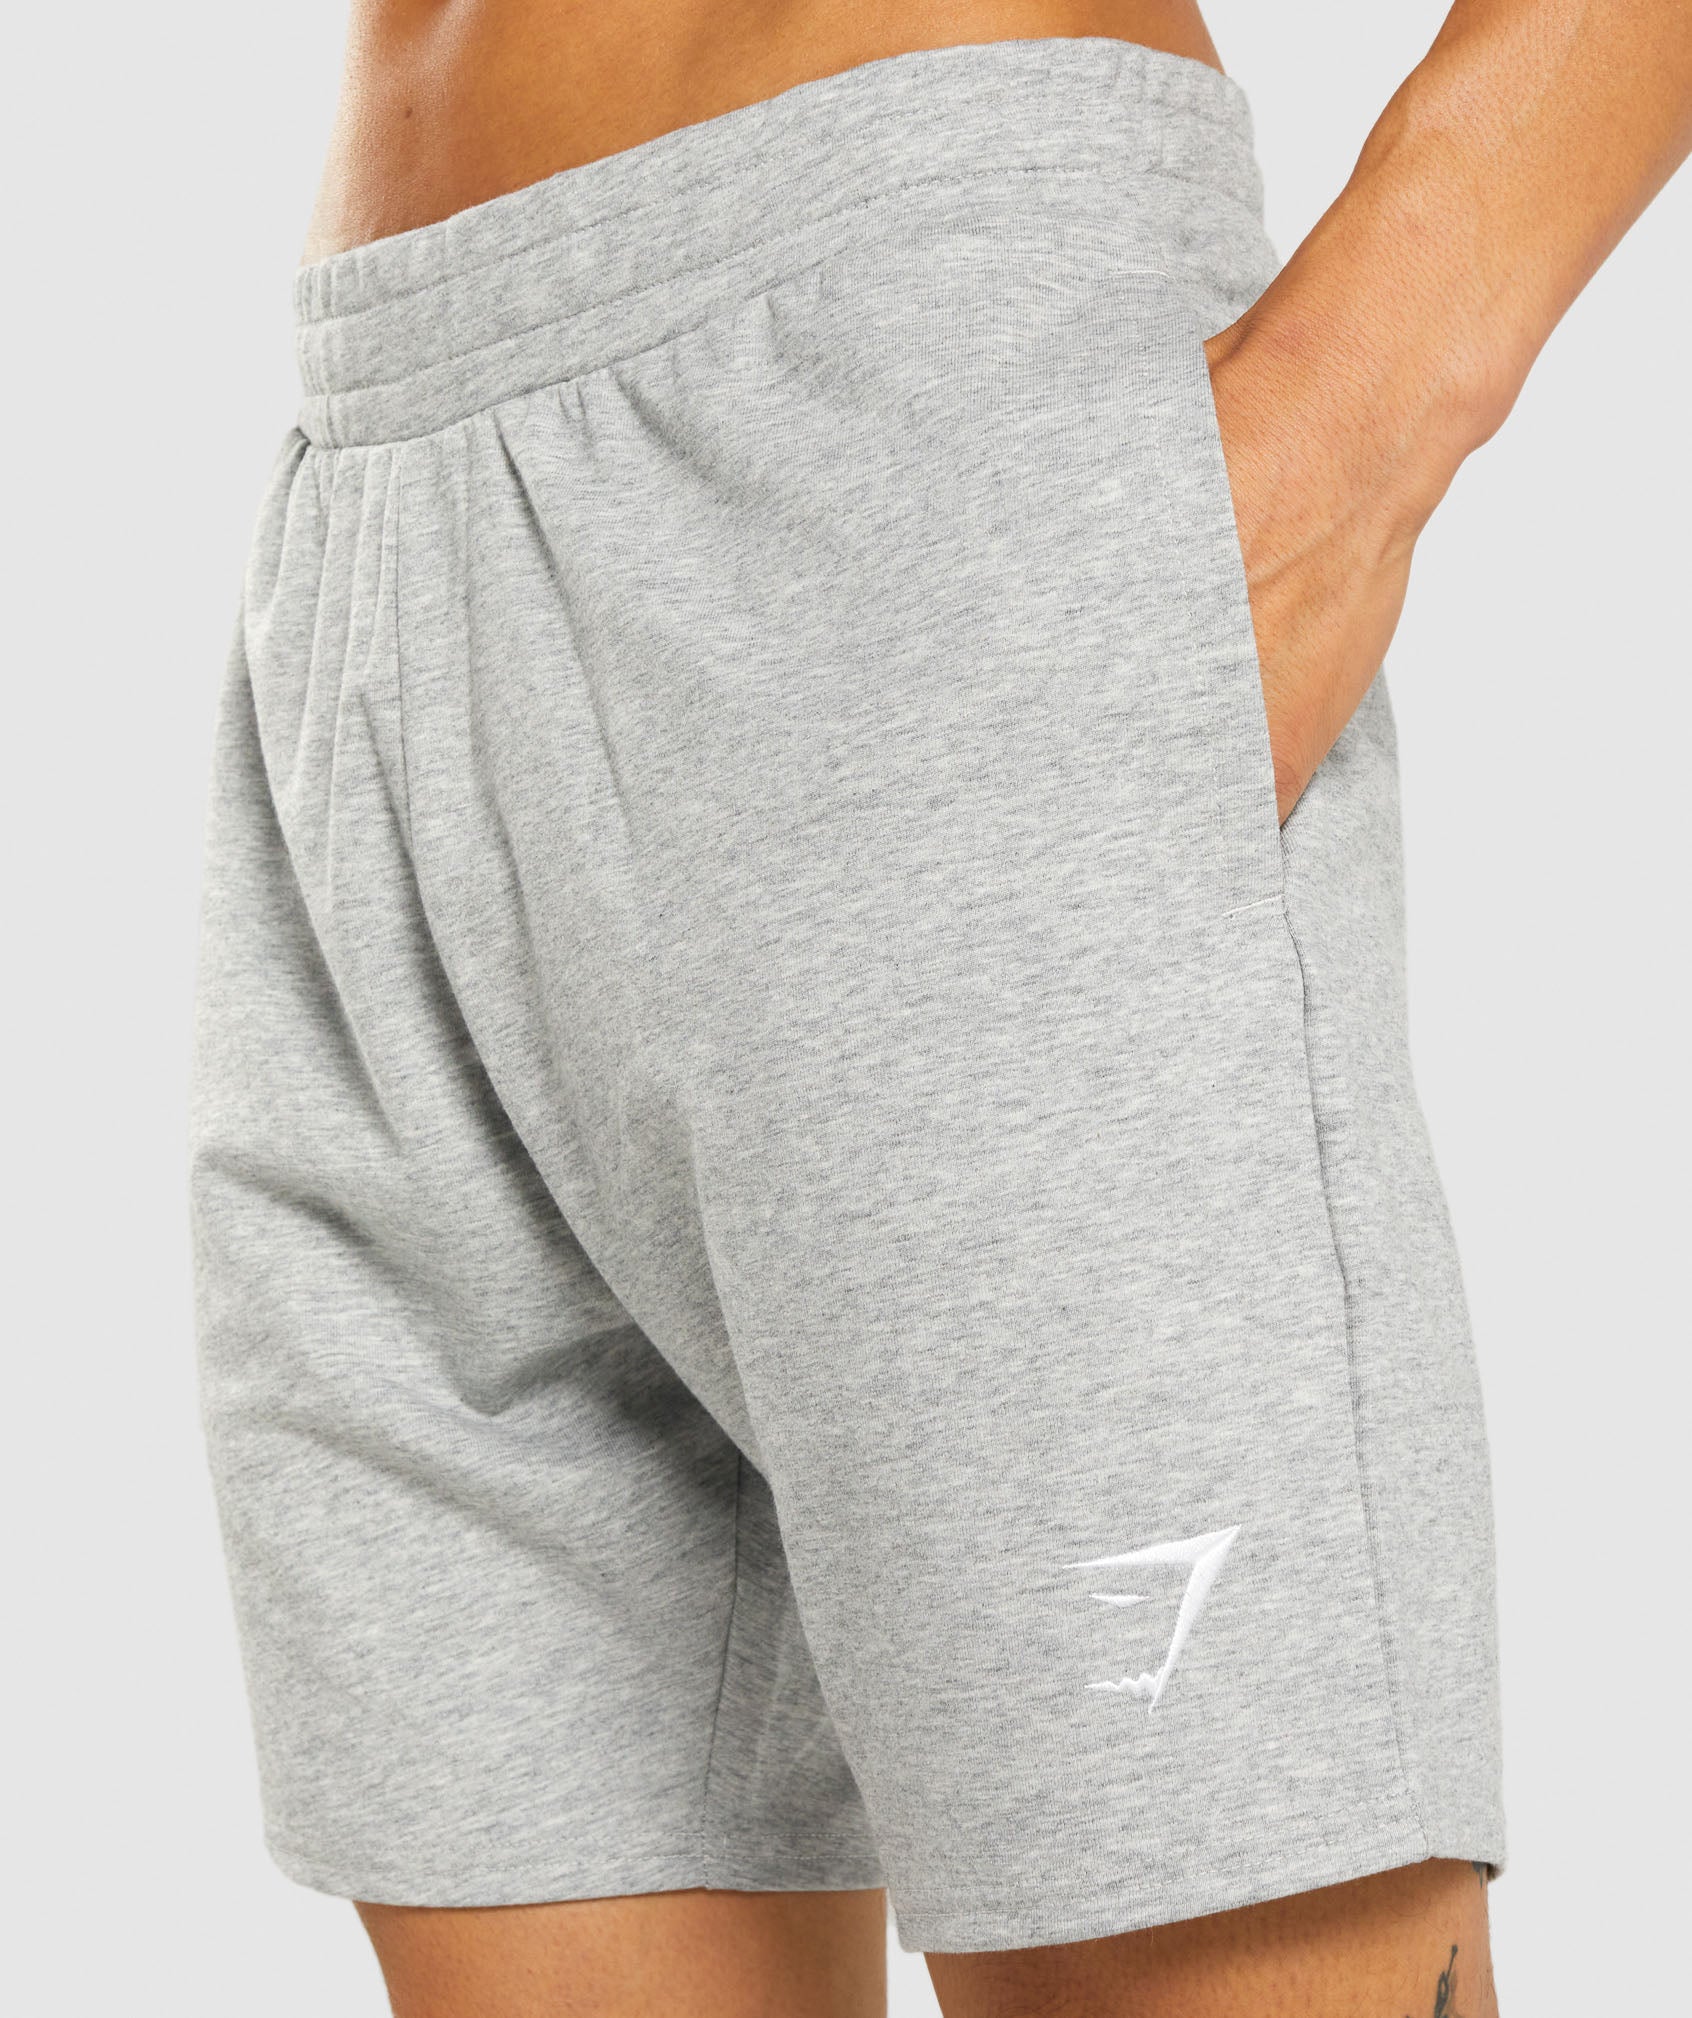 Critical 7" Shorts in Light Grey Core Marl - view 5